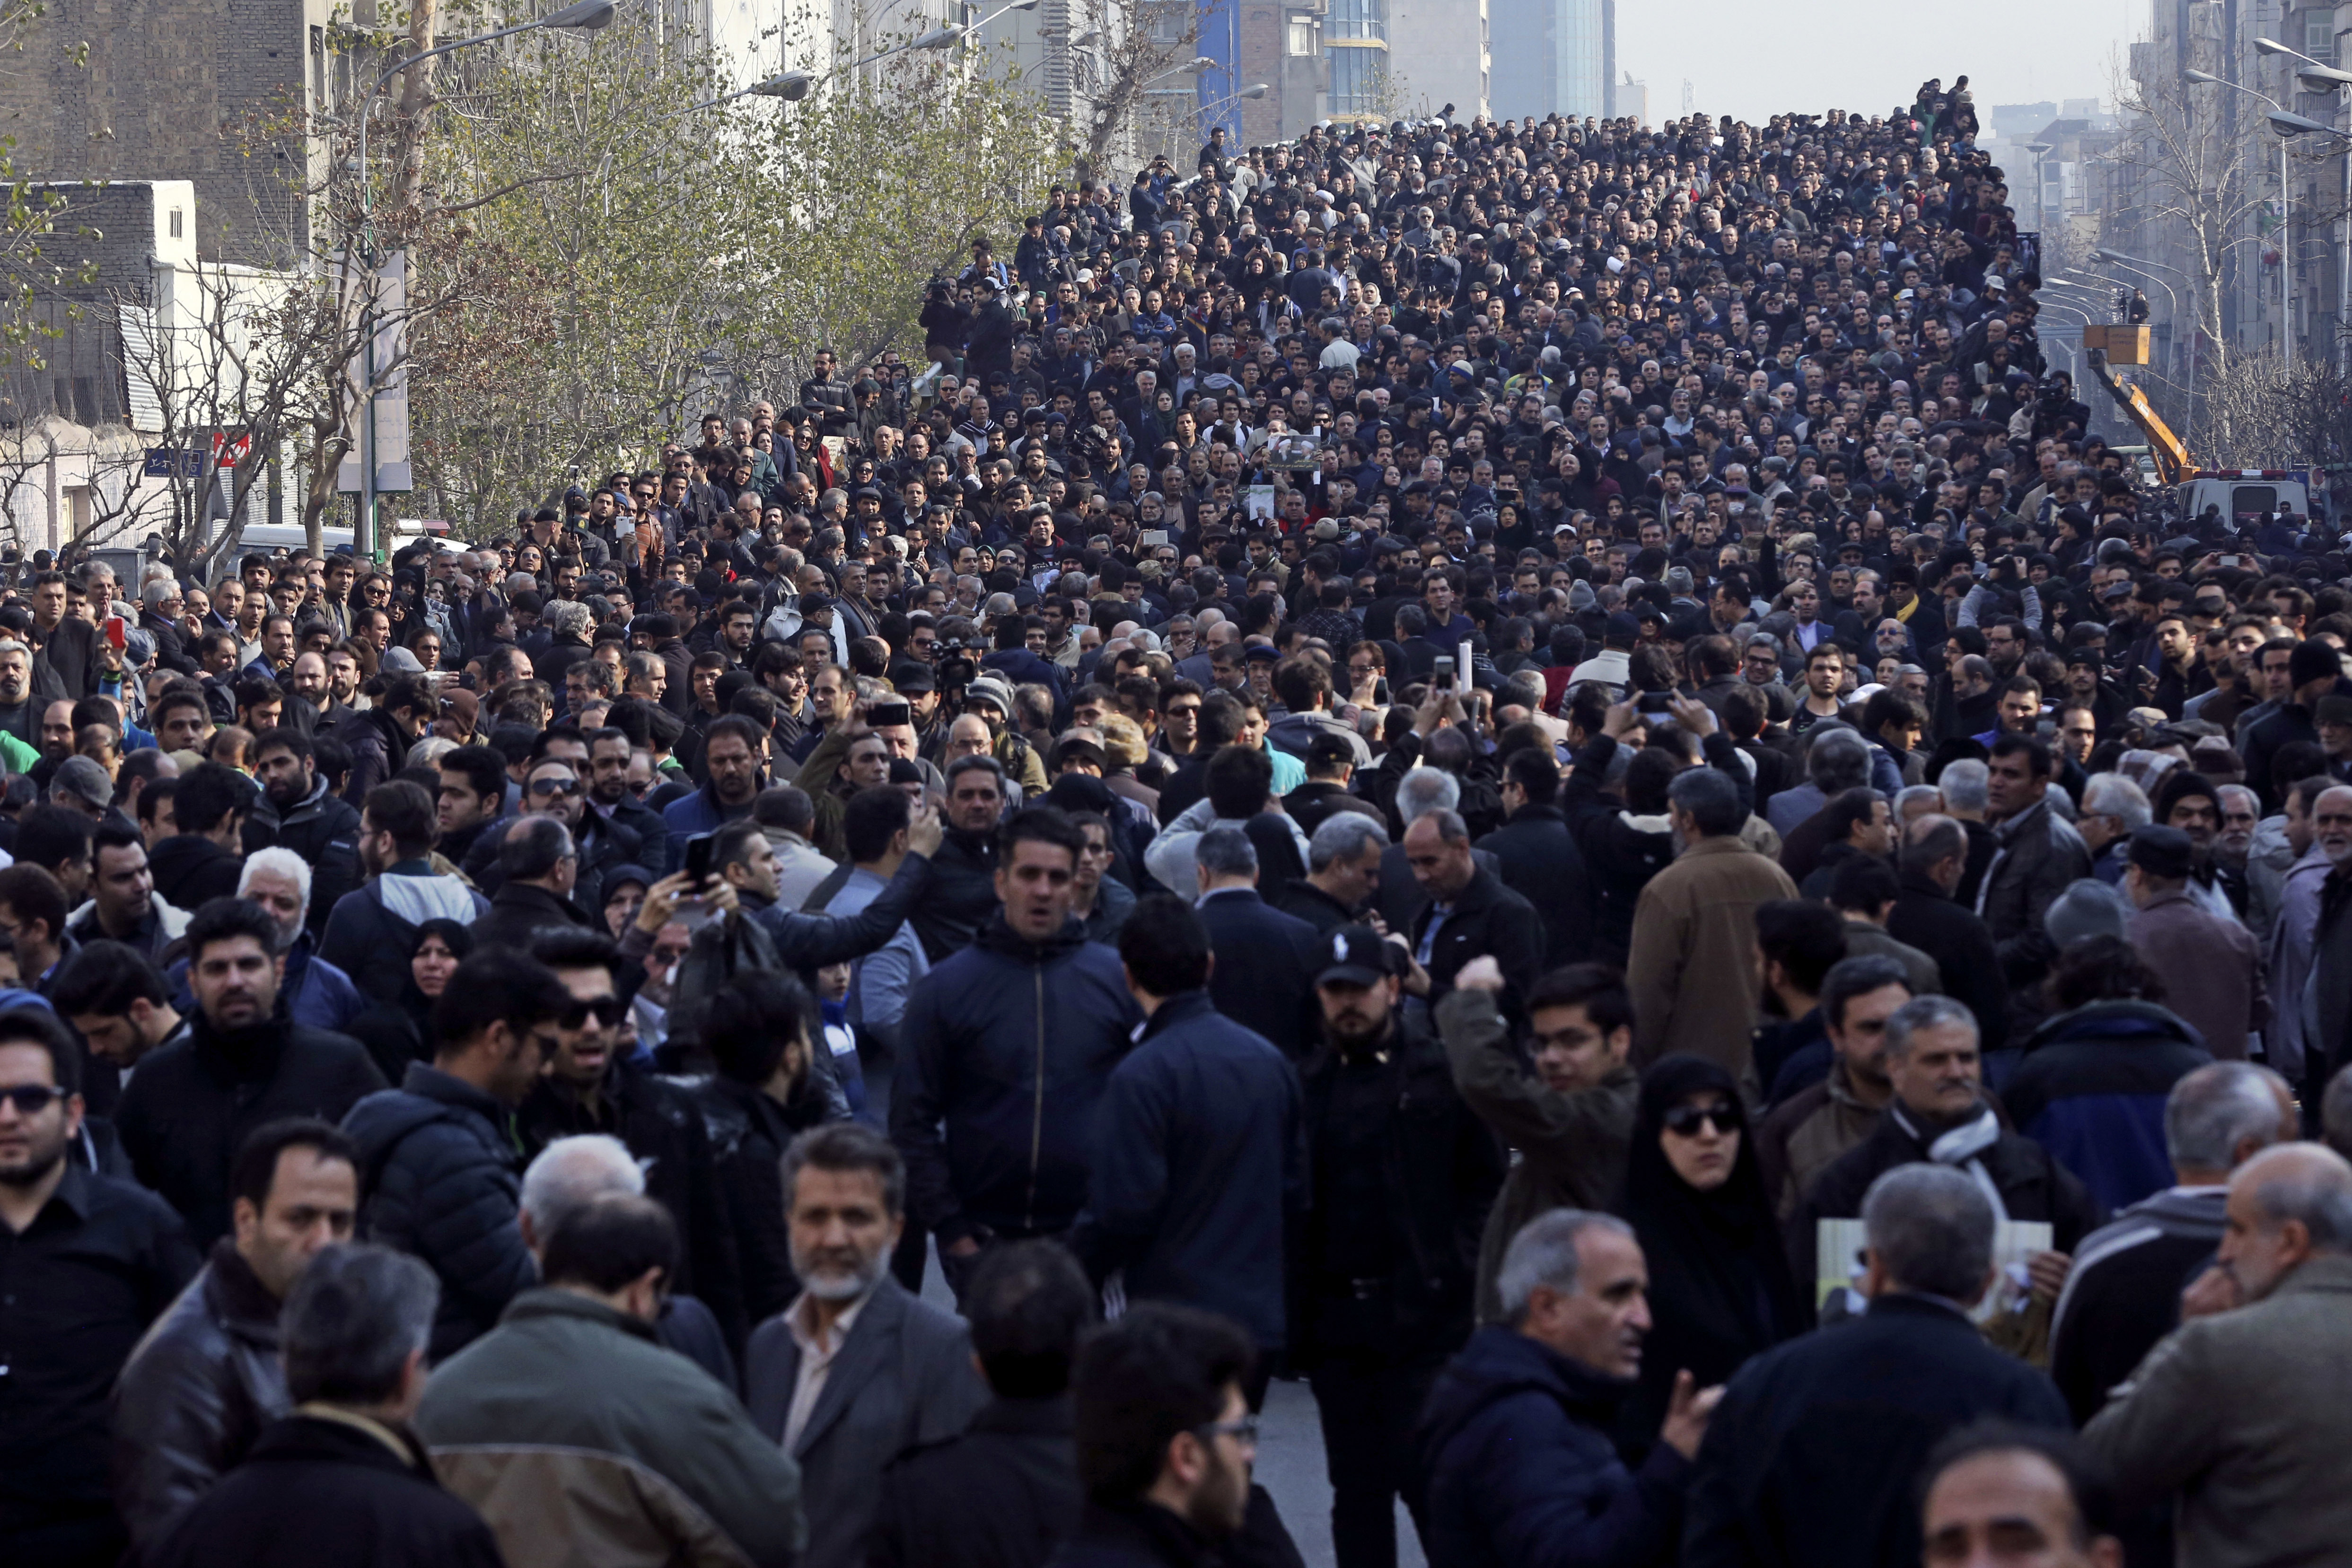 Mourners attend the funeral of former Iranian President Akbar Hashemi Rafsanjani, in Tehran, Iran, Tuesday, Jan. 10, 2017. Hundreds of thousands of mourners have flooded the streets of Tehran, beating their chests and wailing in grief for Rafsanjani, who died over the weekend at the age of 82. The crowds have filled main thoroughfares of the capital as top government and clerical officials held a funeral service at Tehran University. (AP Photo/Vahid Salemi)